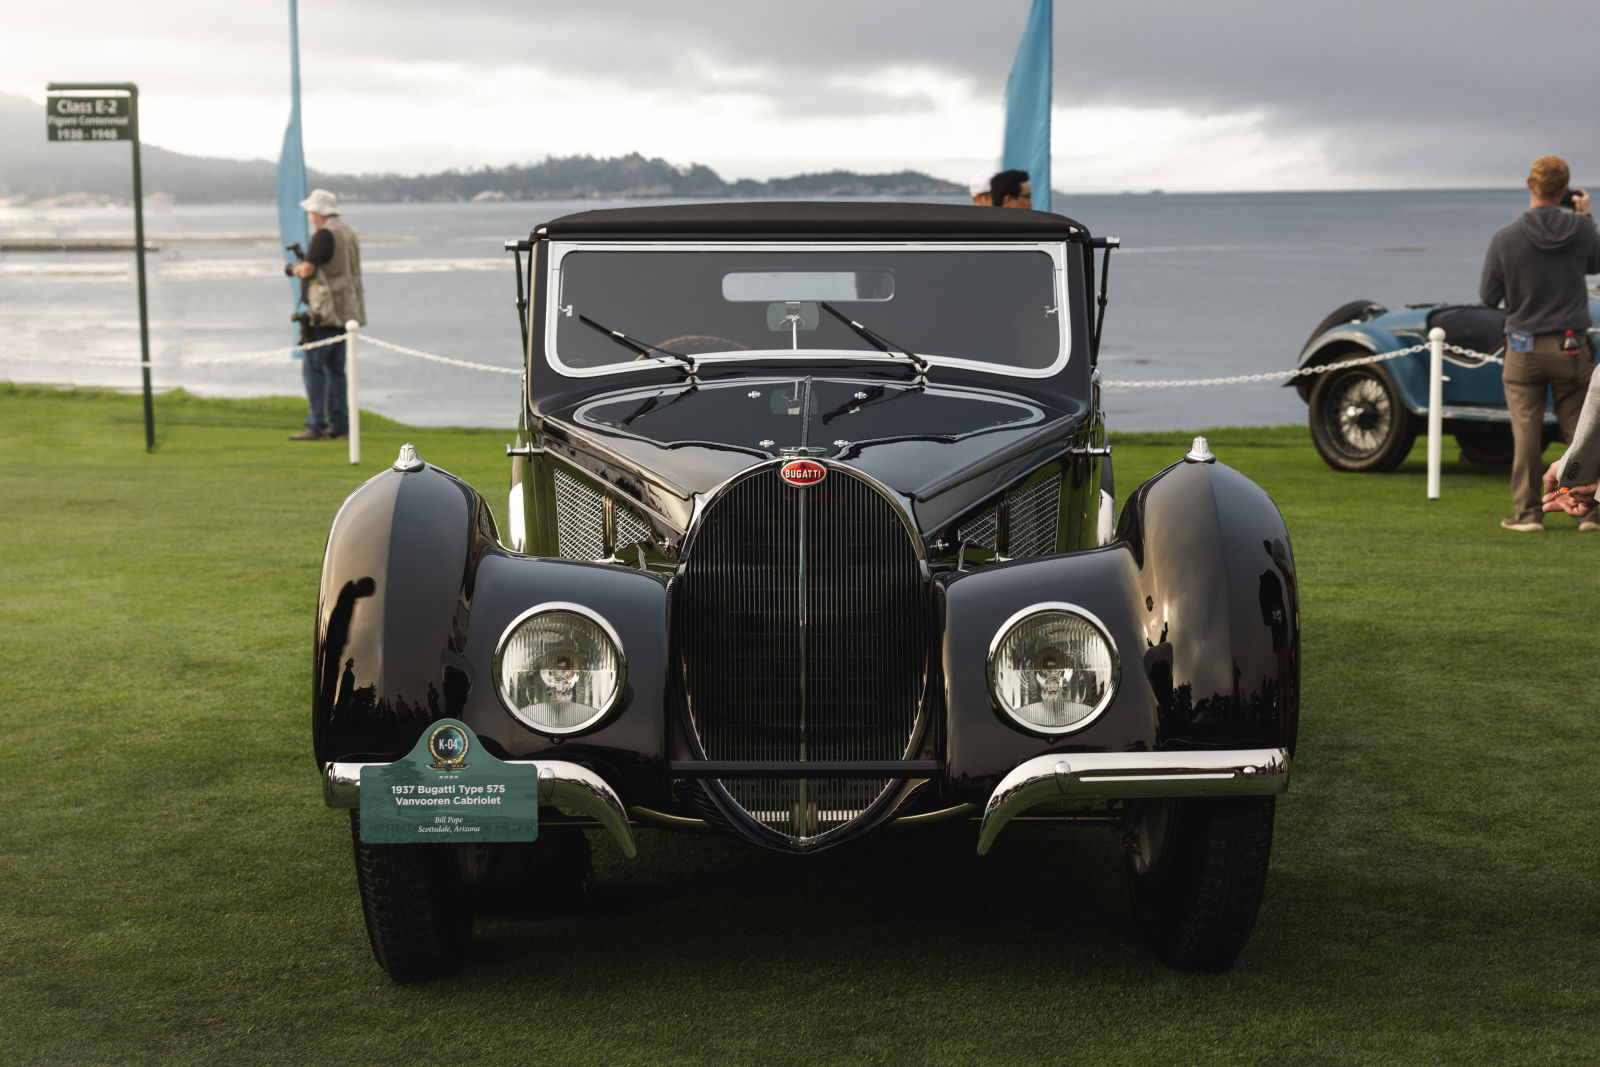 Bugatti 57S Cabriolet - Concours d'Elegance on the Pebble Beach golf course - Monterey Car Week